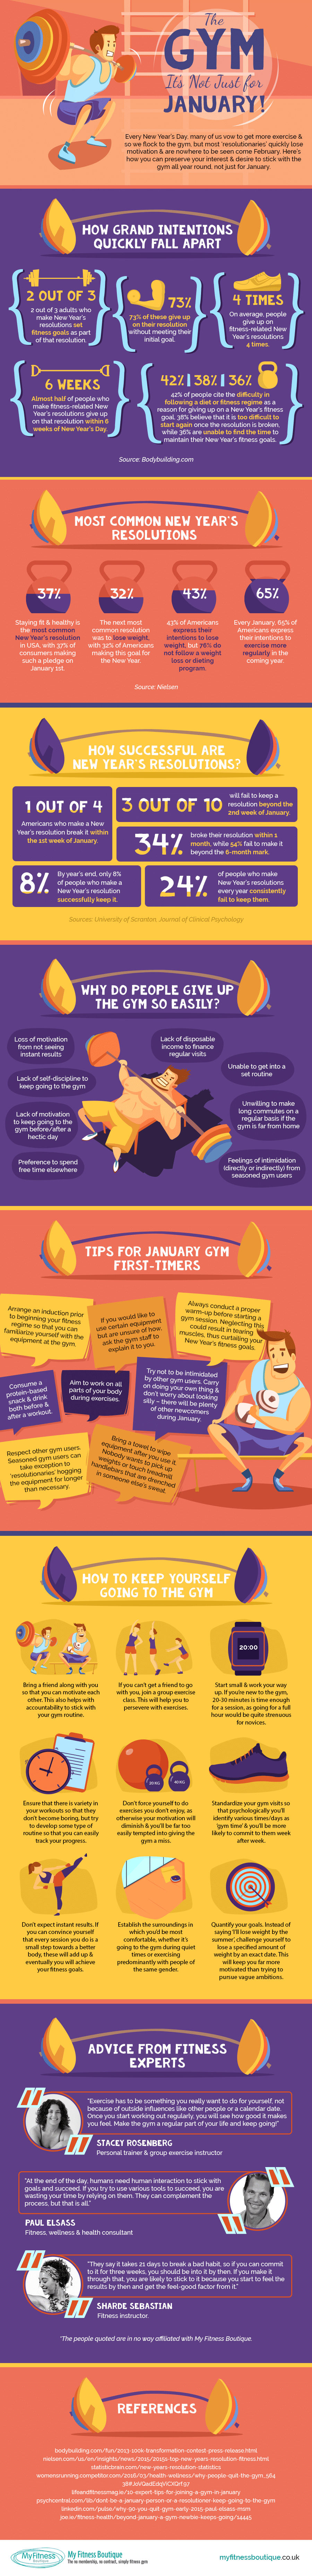 Gym motivation infographic by myfitnessboutique.co.uk to keep your fitness promise thru the year